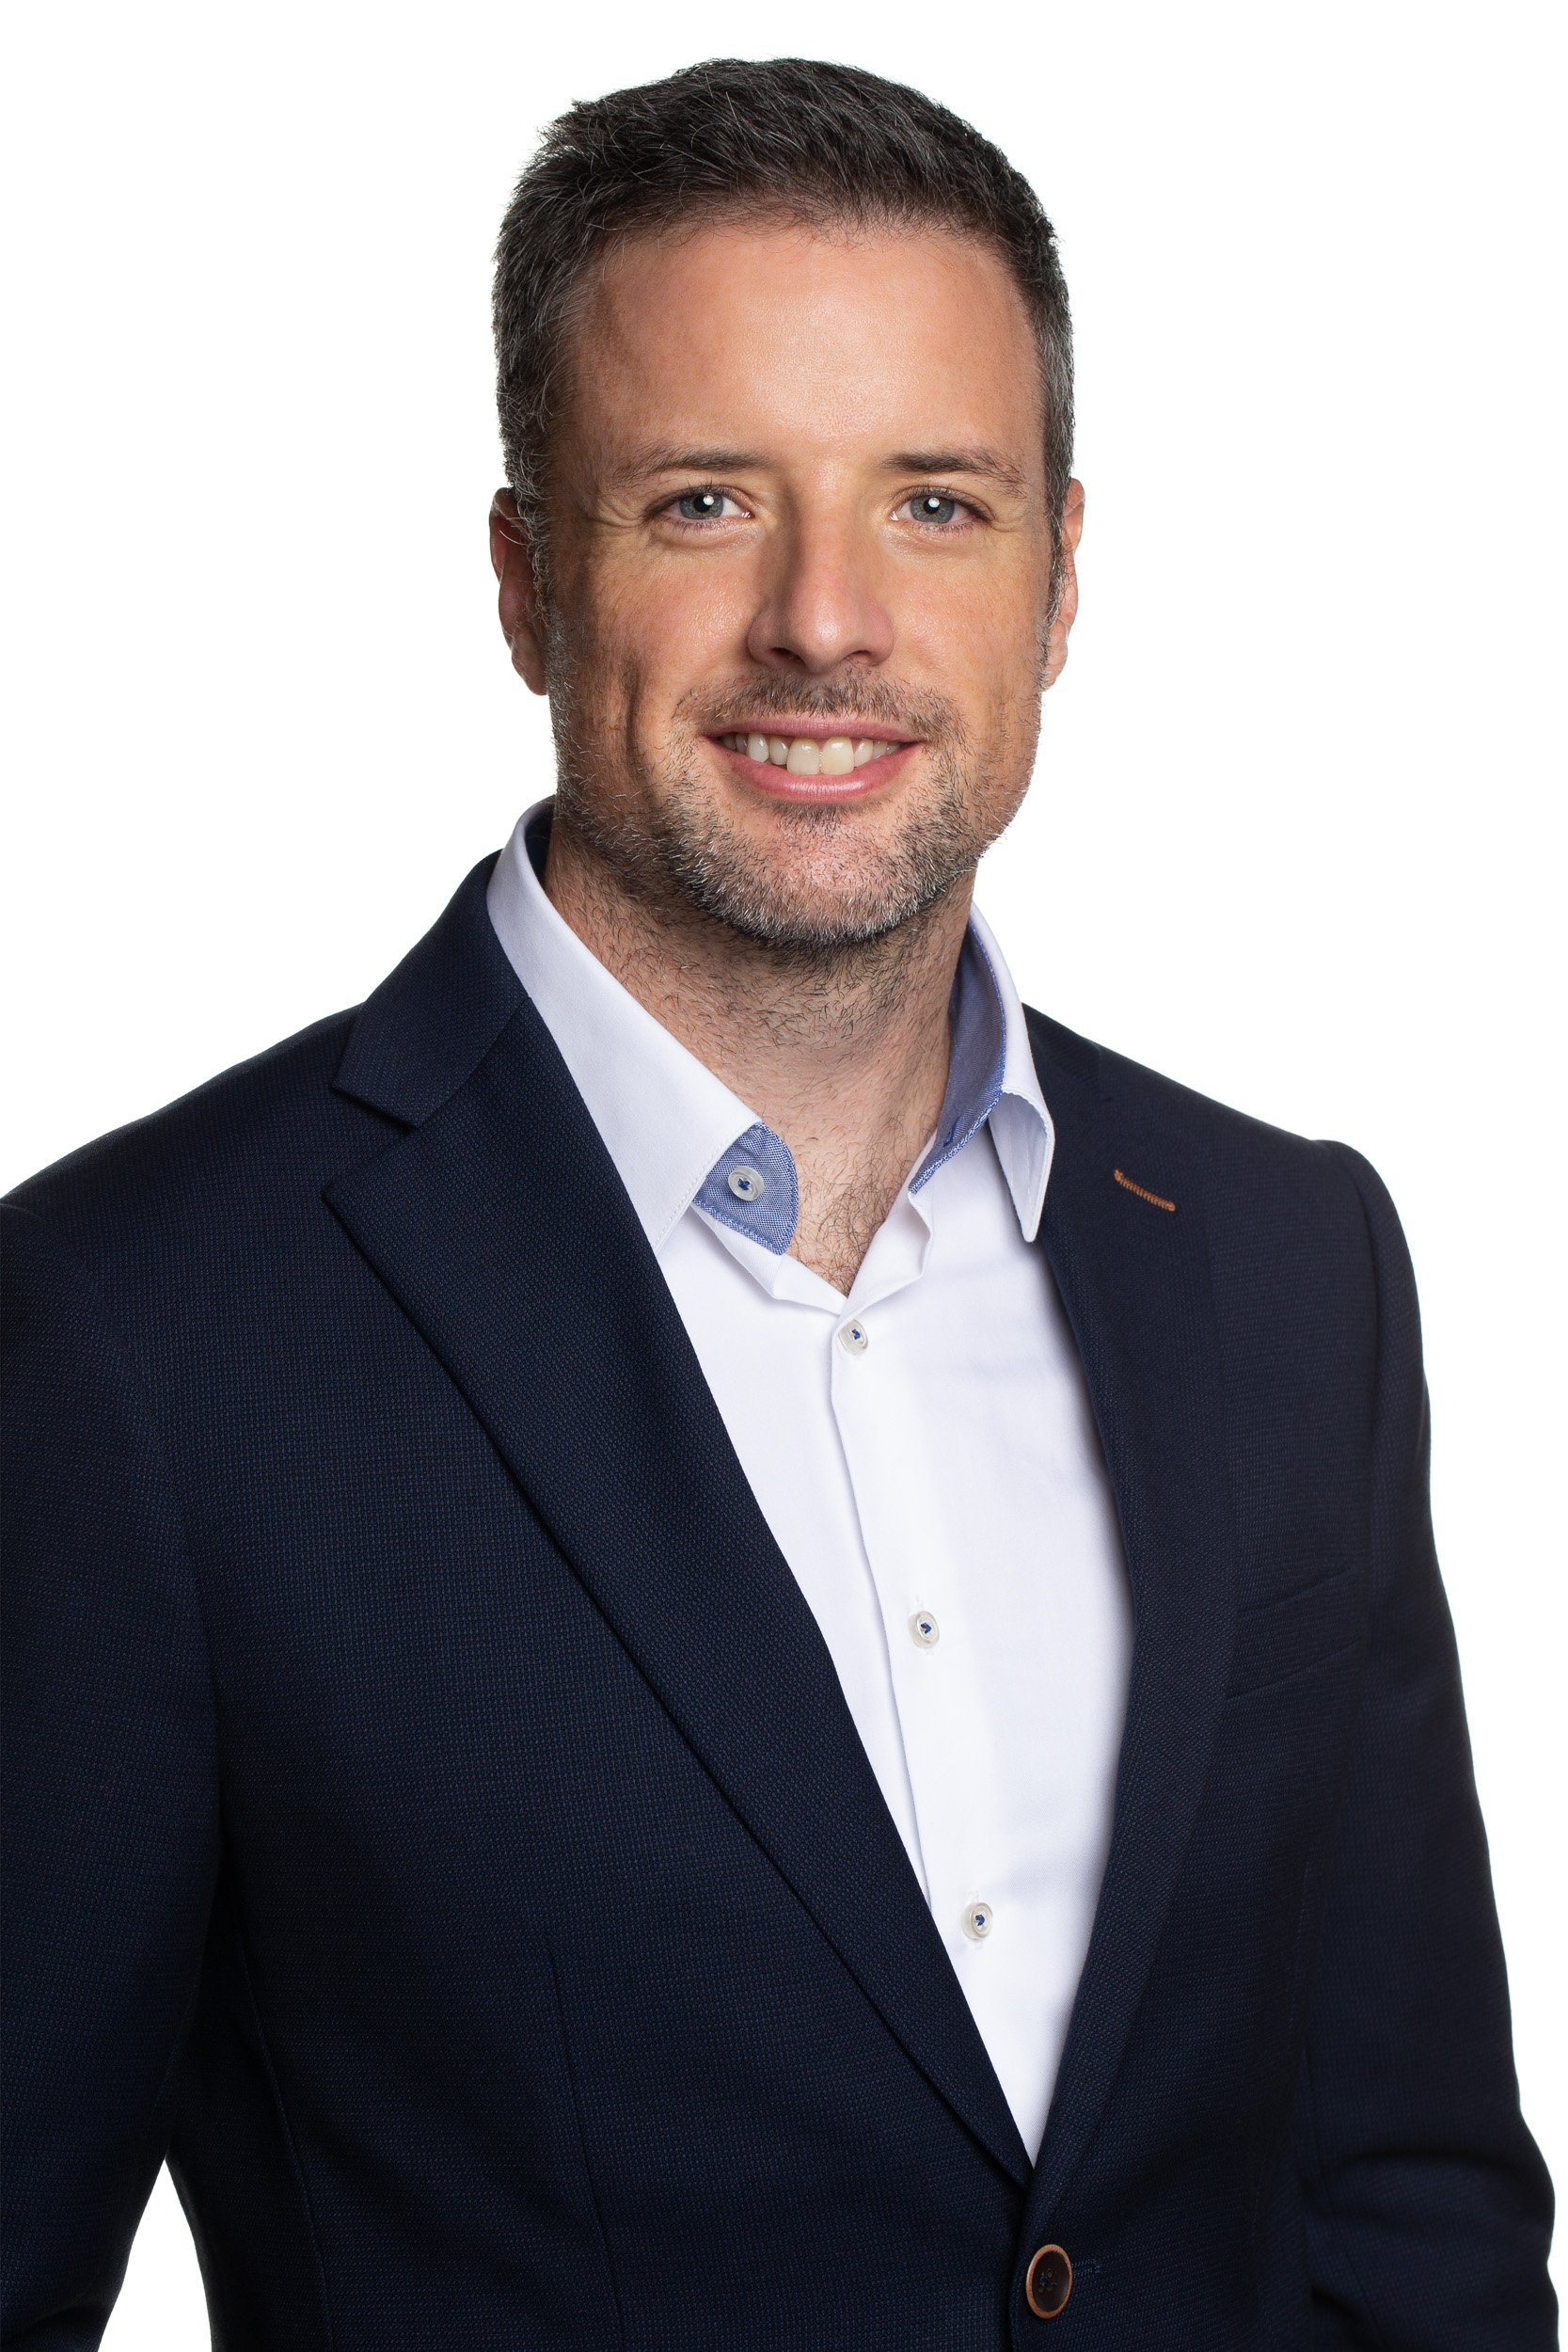 Traditional Corporate Portrait with White Background.jpg